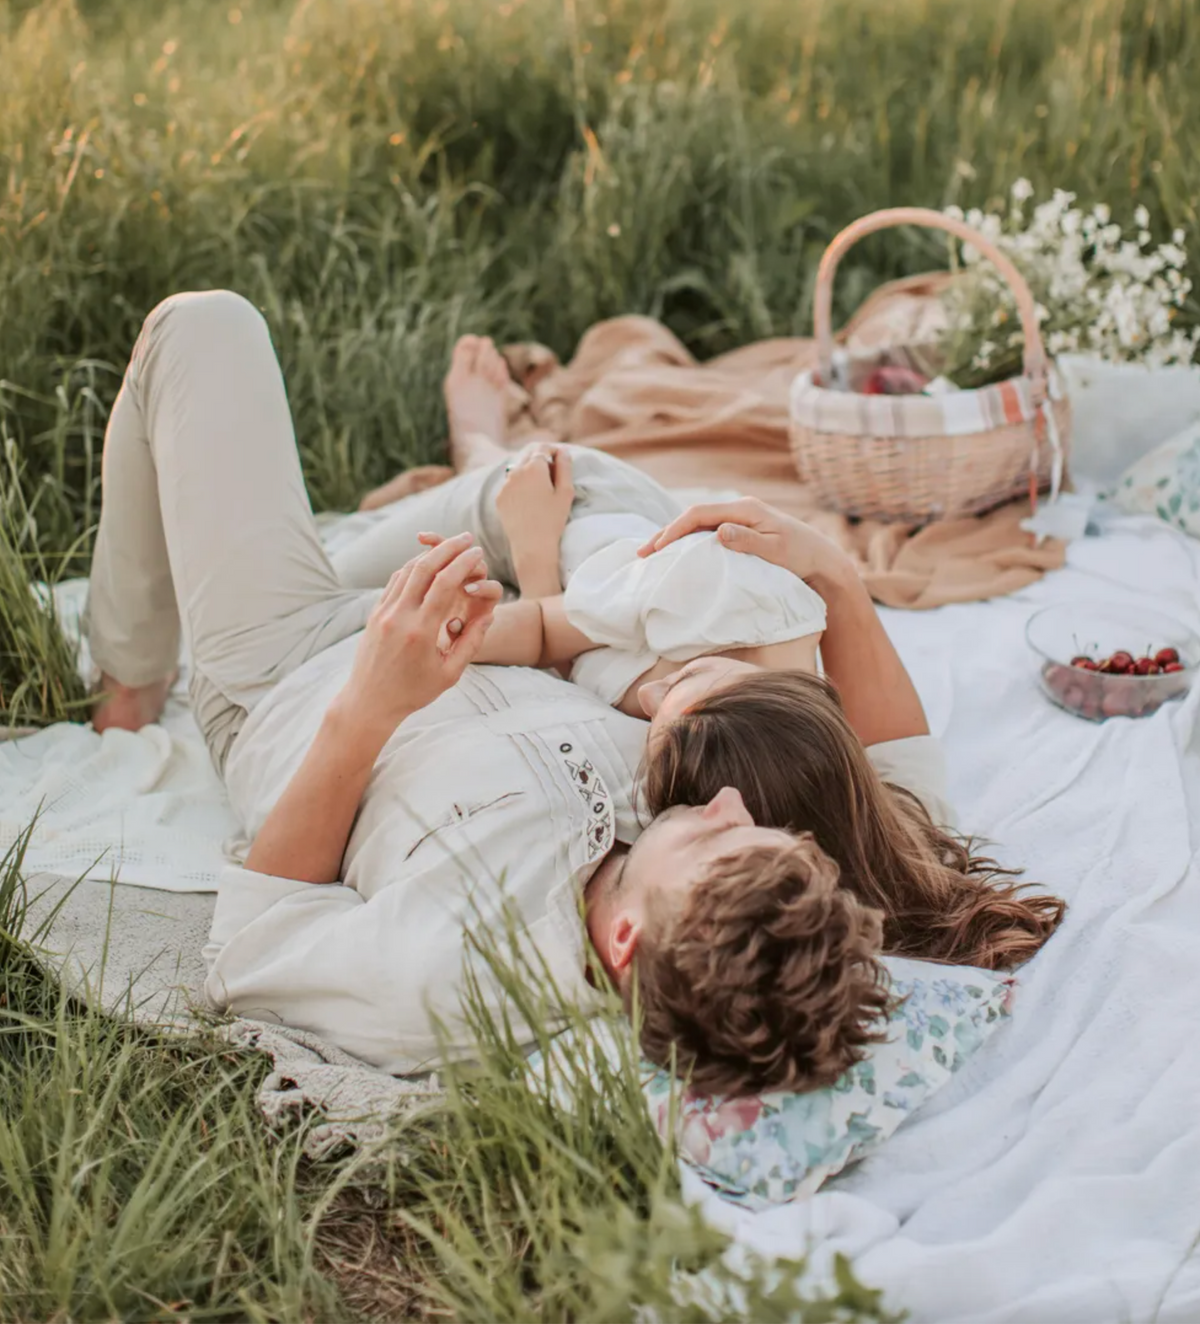 date night ideas according to your myers-briggs type